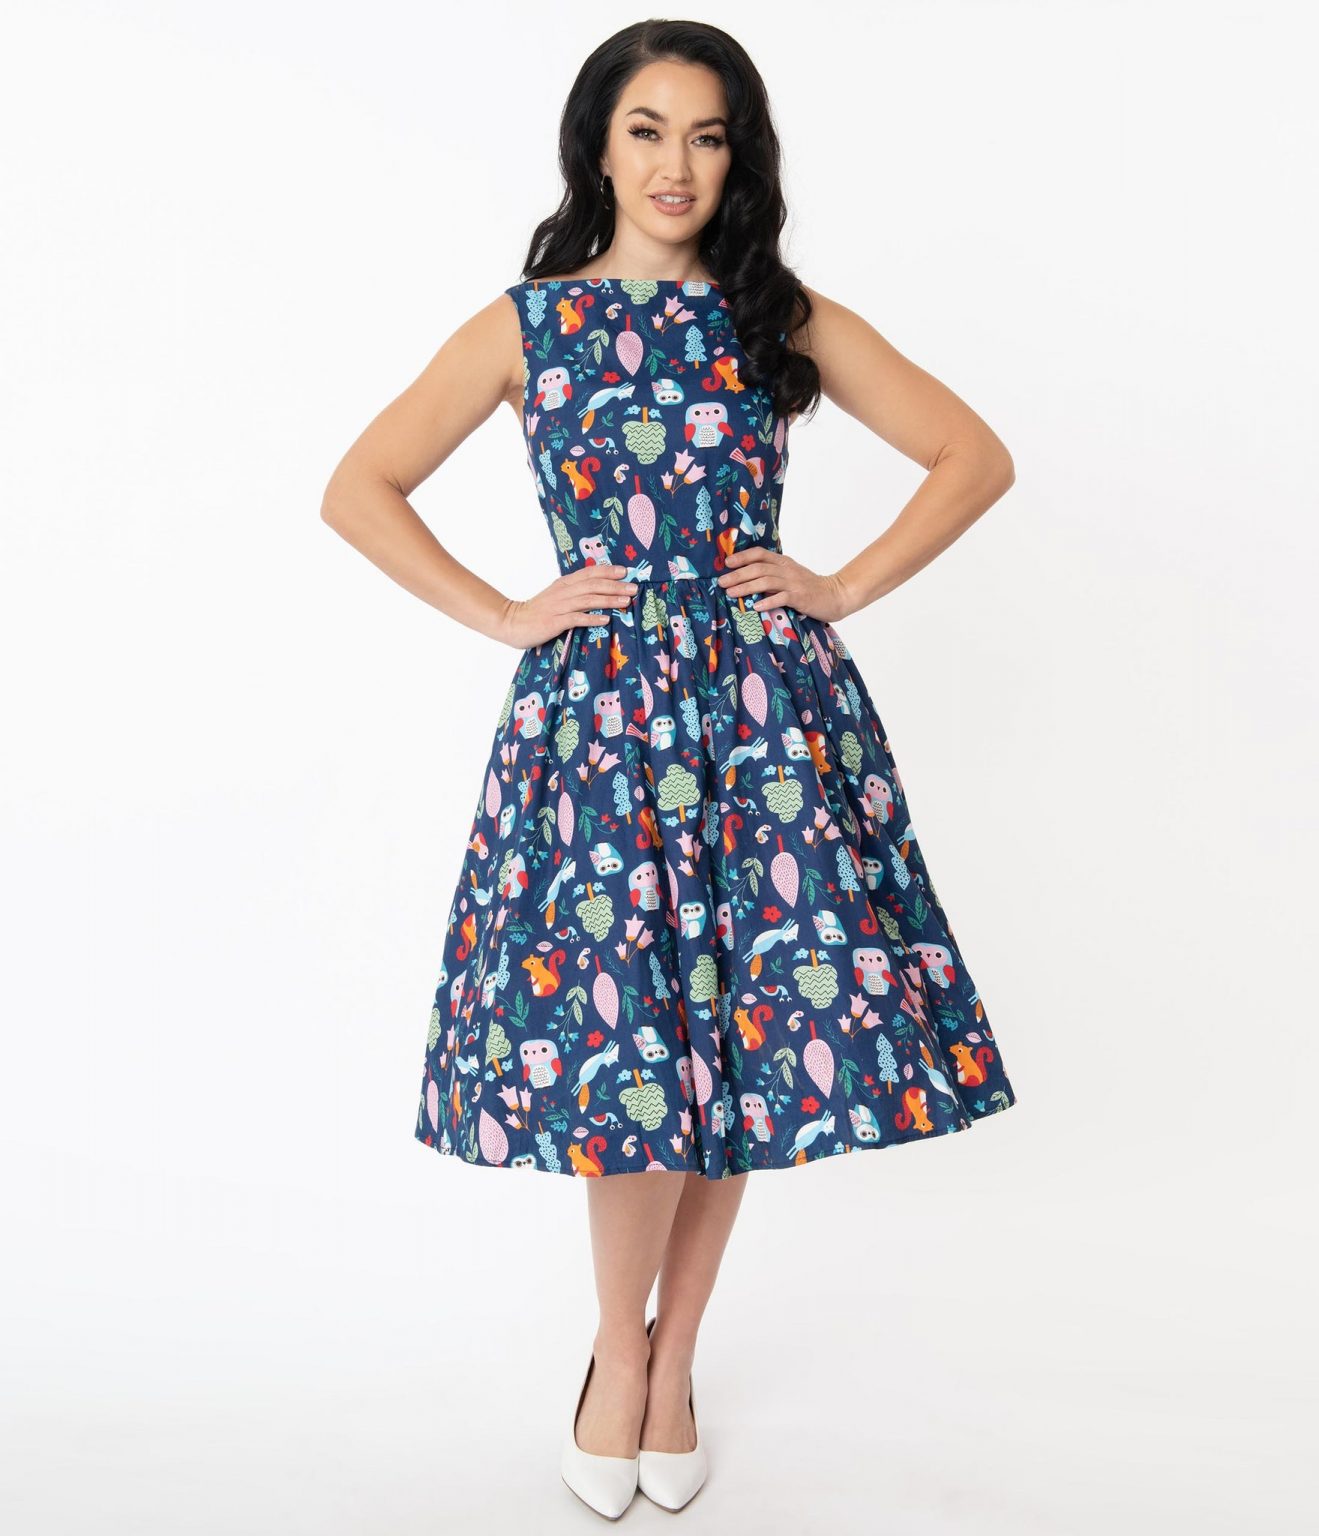 27+ Stores Like ModCloth For Vintage-Inspired & Quirky Clothing